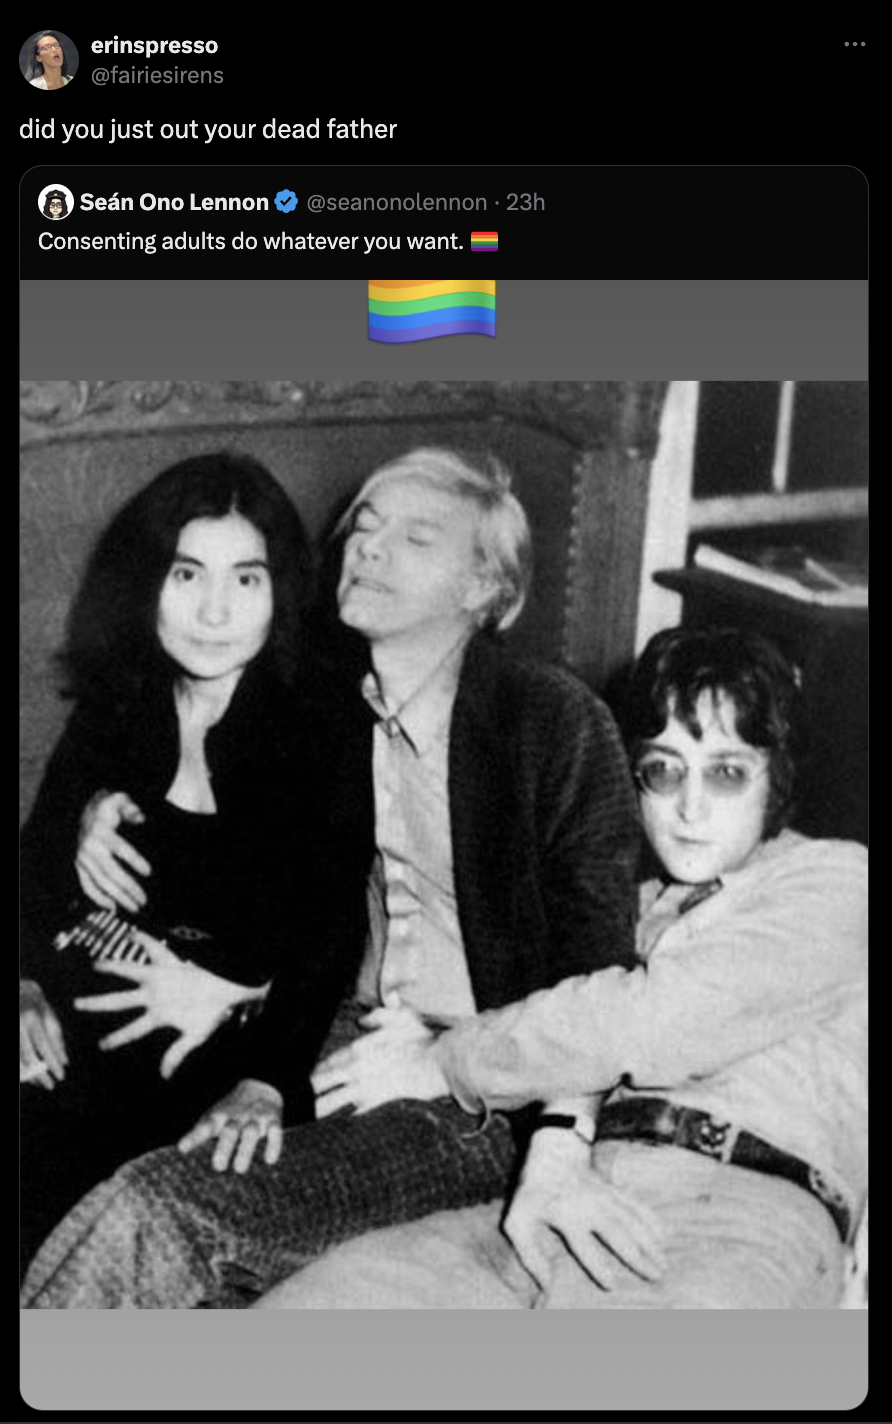 andy warhol y john lennon - erinspresso did you just out your dead father Sen Ono Lennon lennon23h Consenting adults do whatever you want.